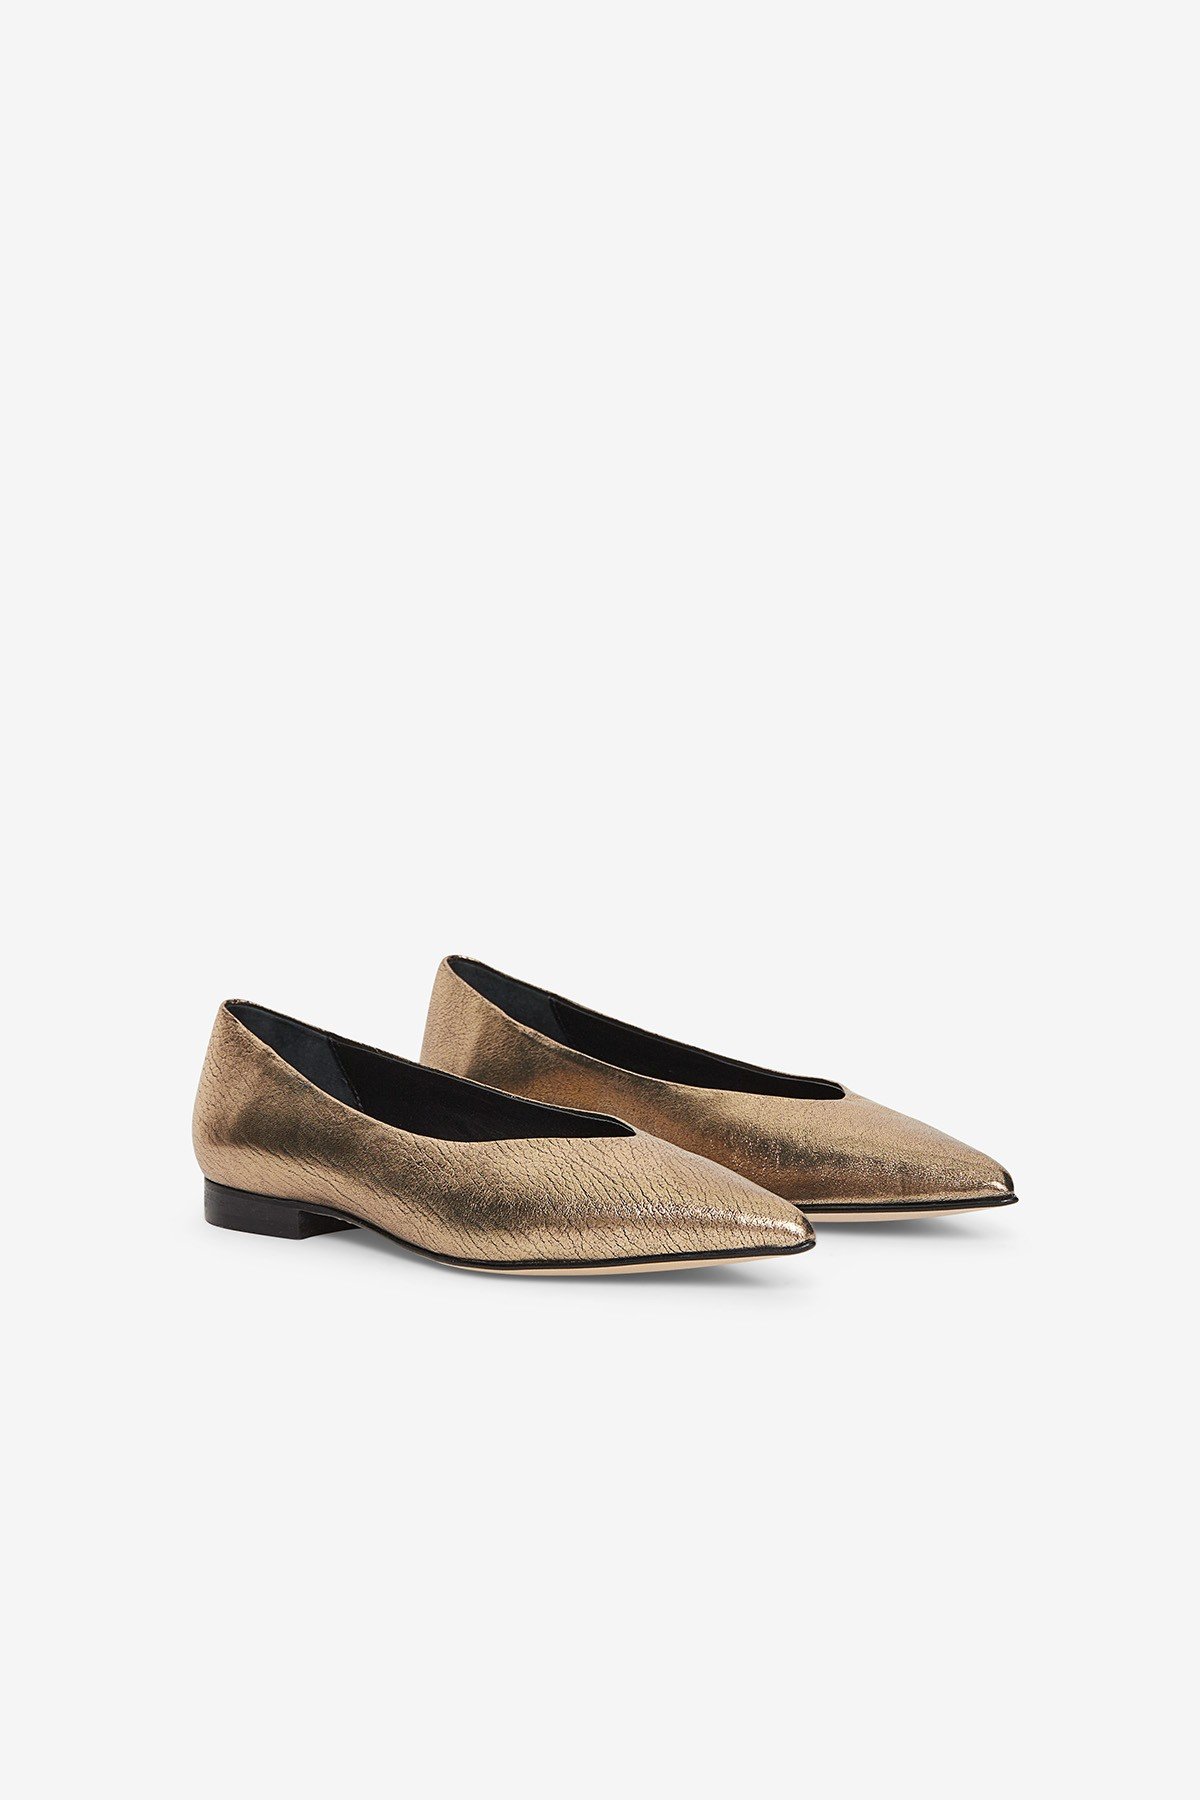 Leather ballet flat mules